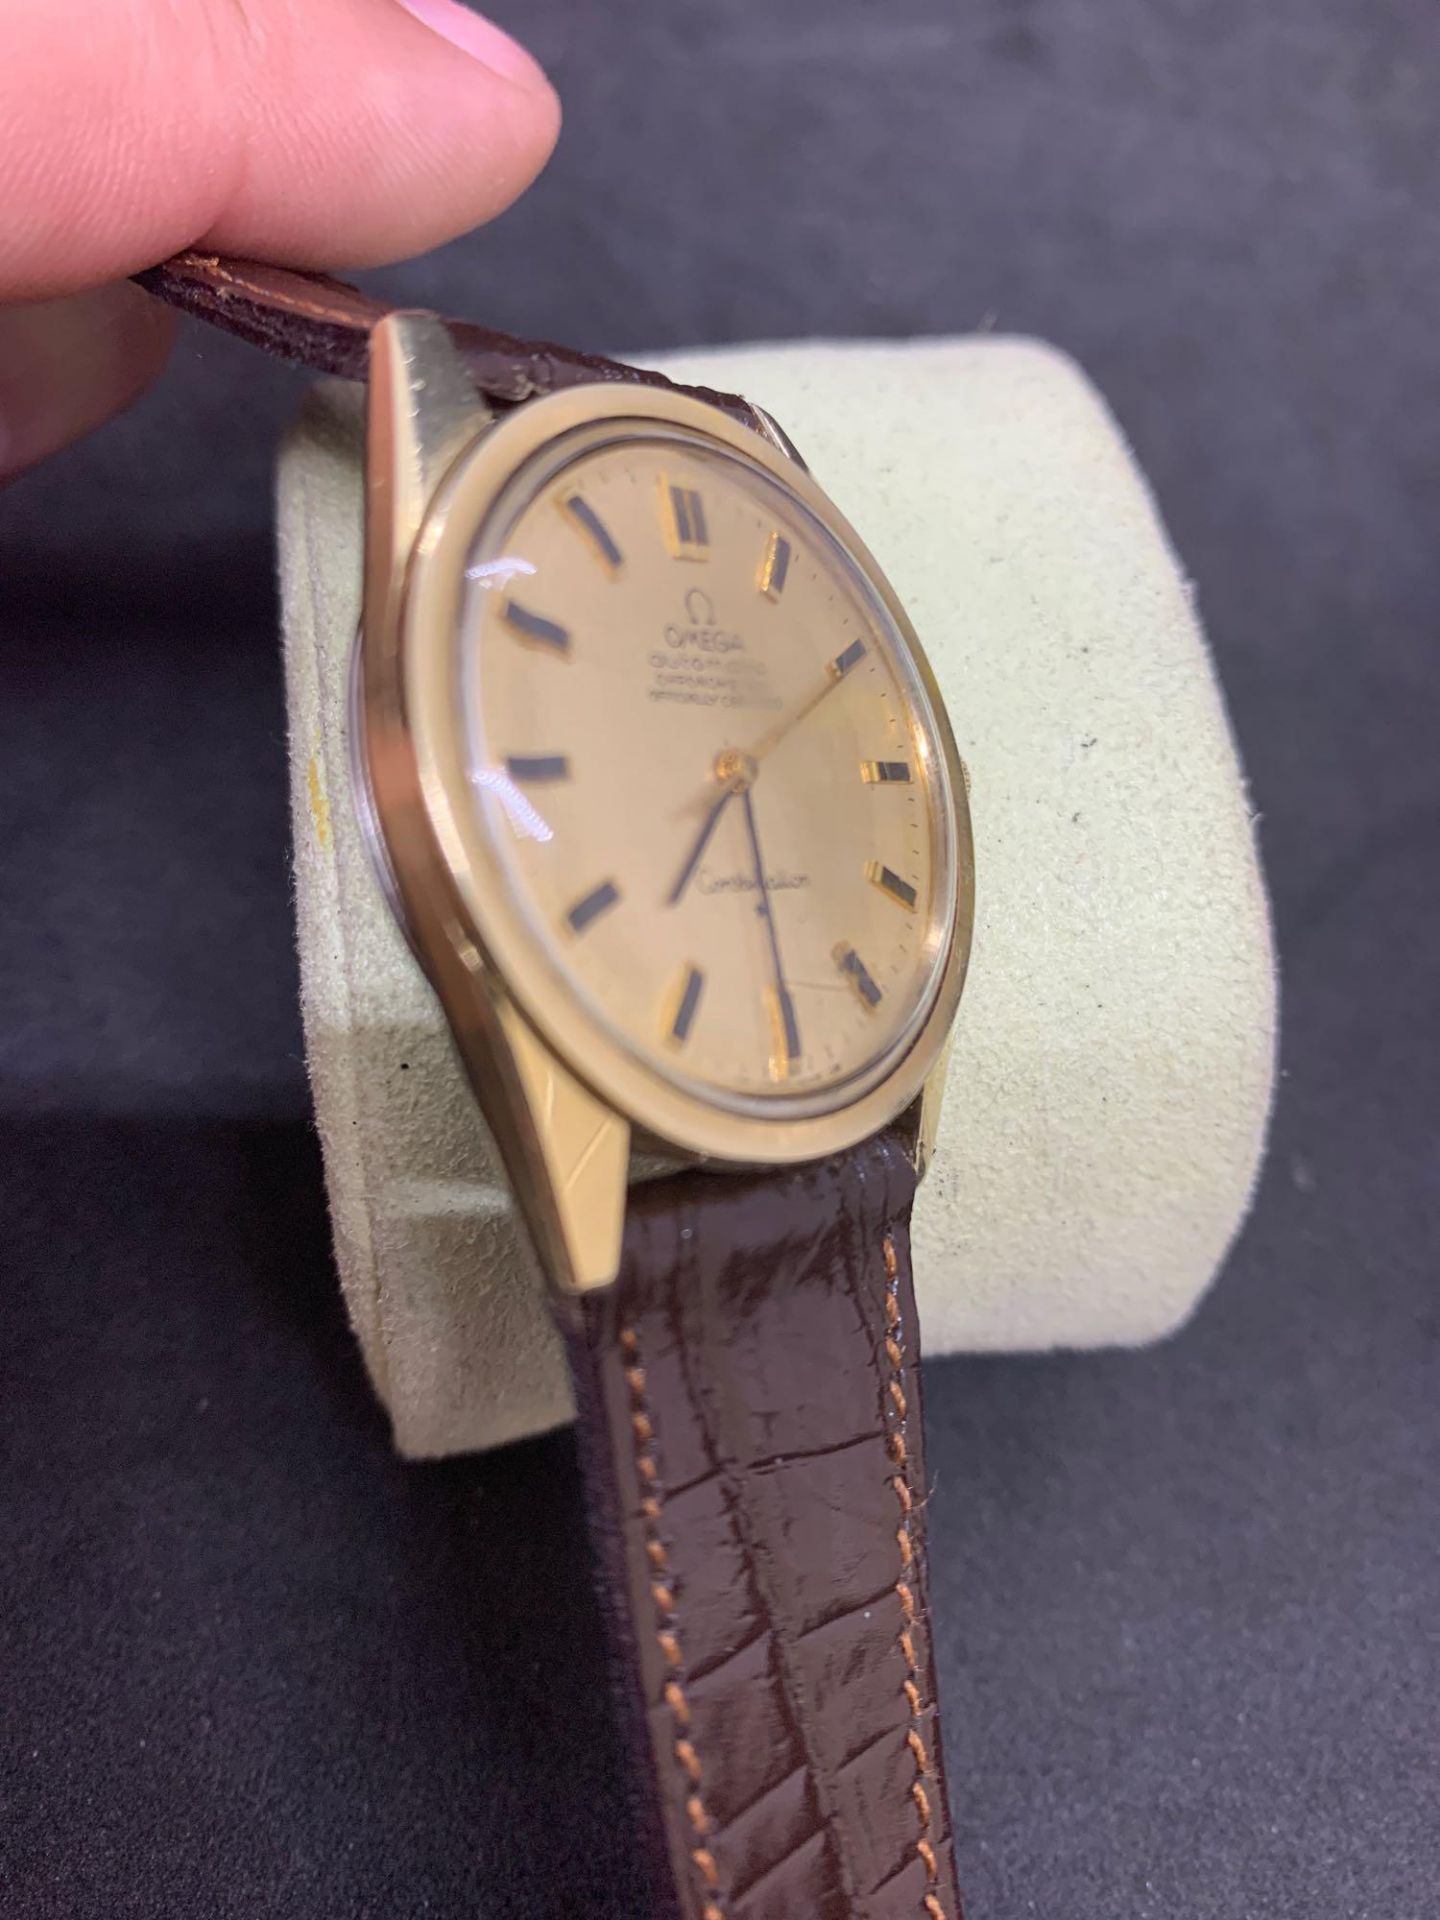 Gents Omega constellation automatic watch approximately 35 mm - Image 6 of 6